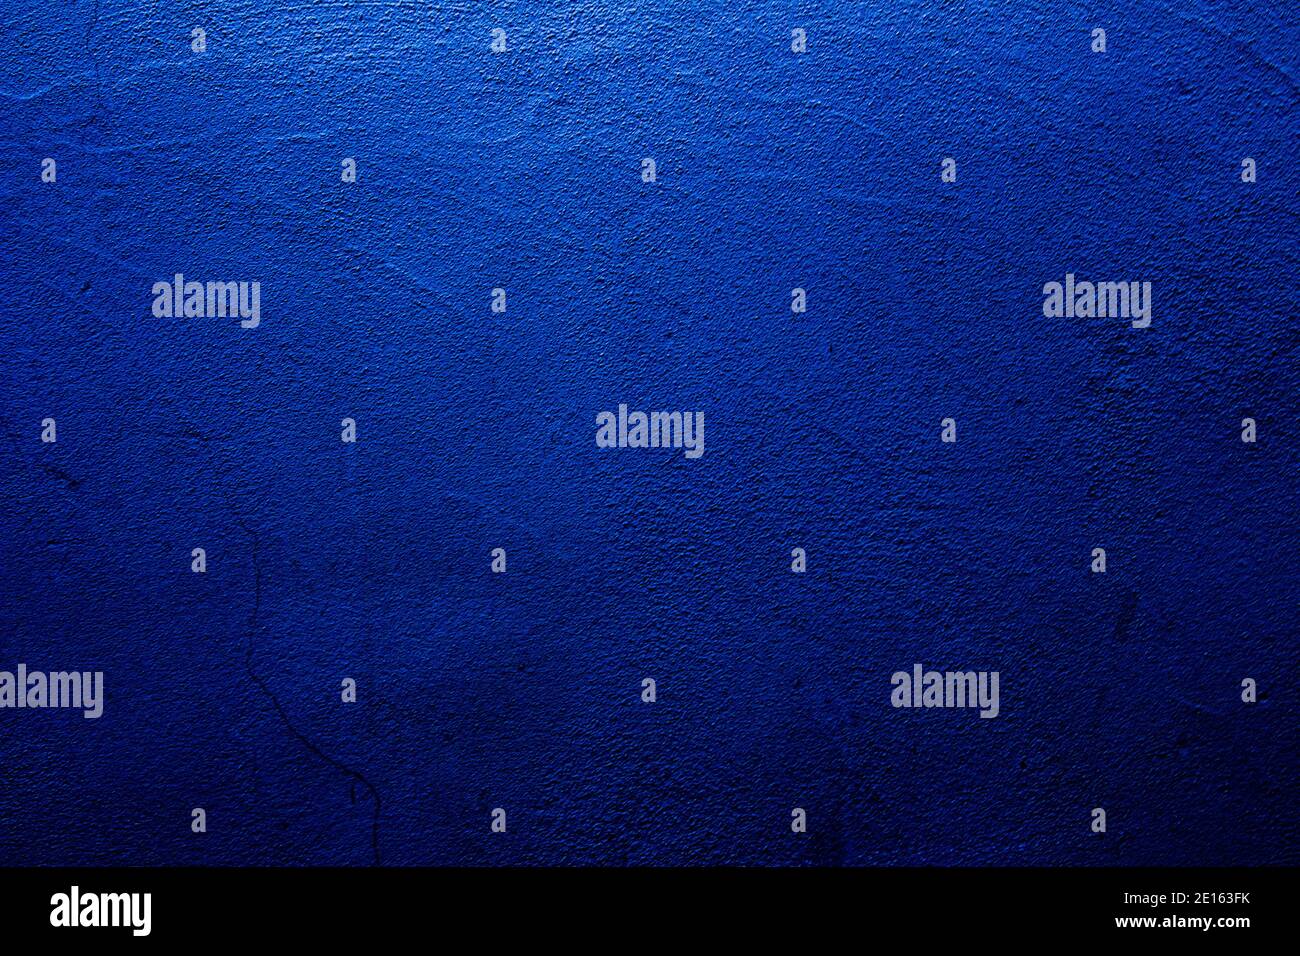 Blue colored abstract wall background with textures of different shades of blues Stock Photo